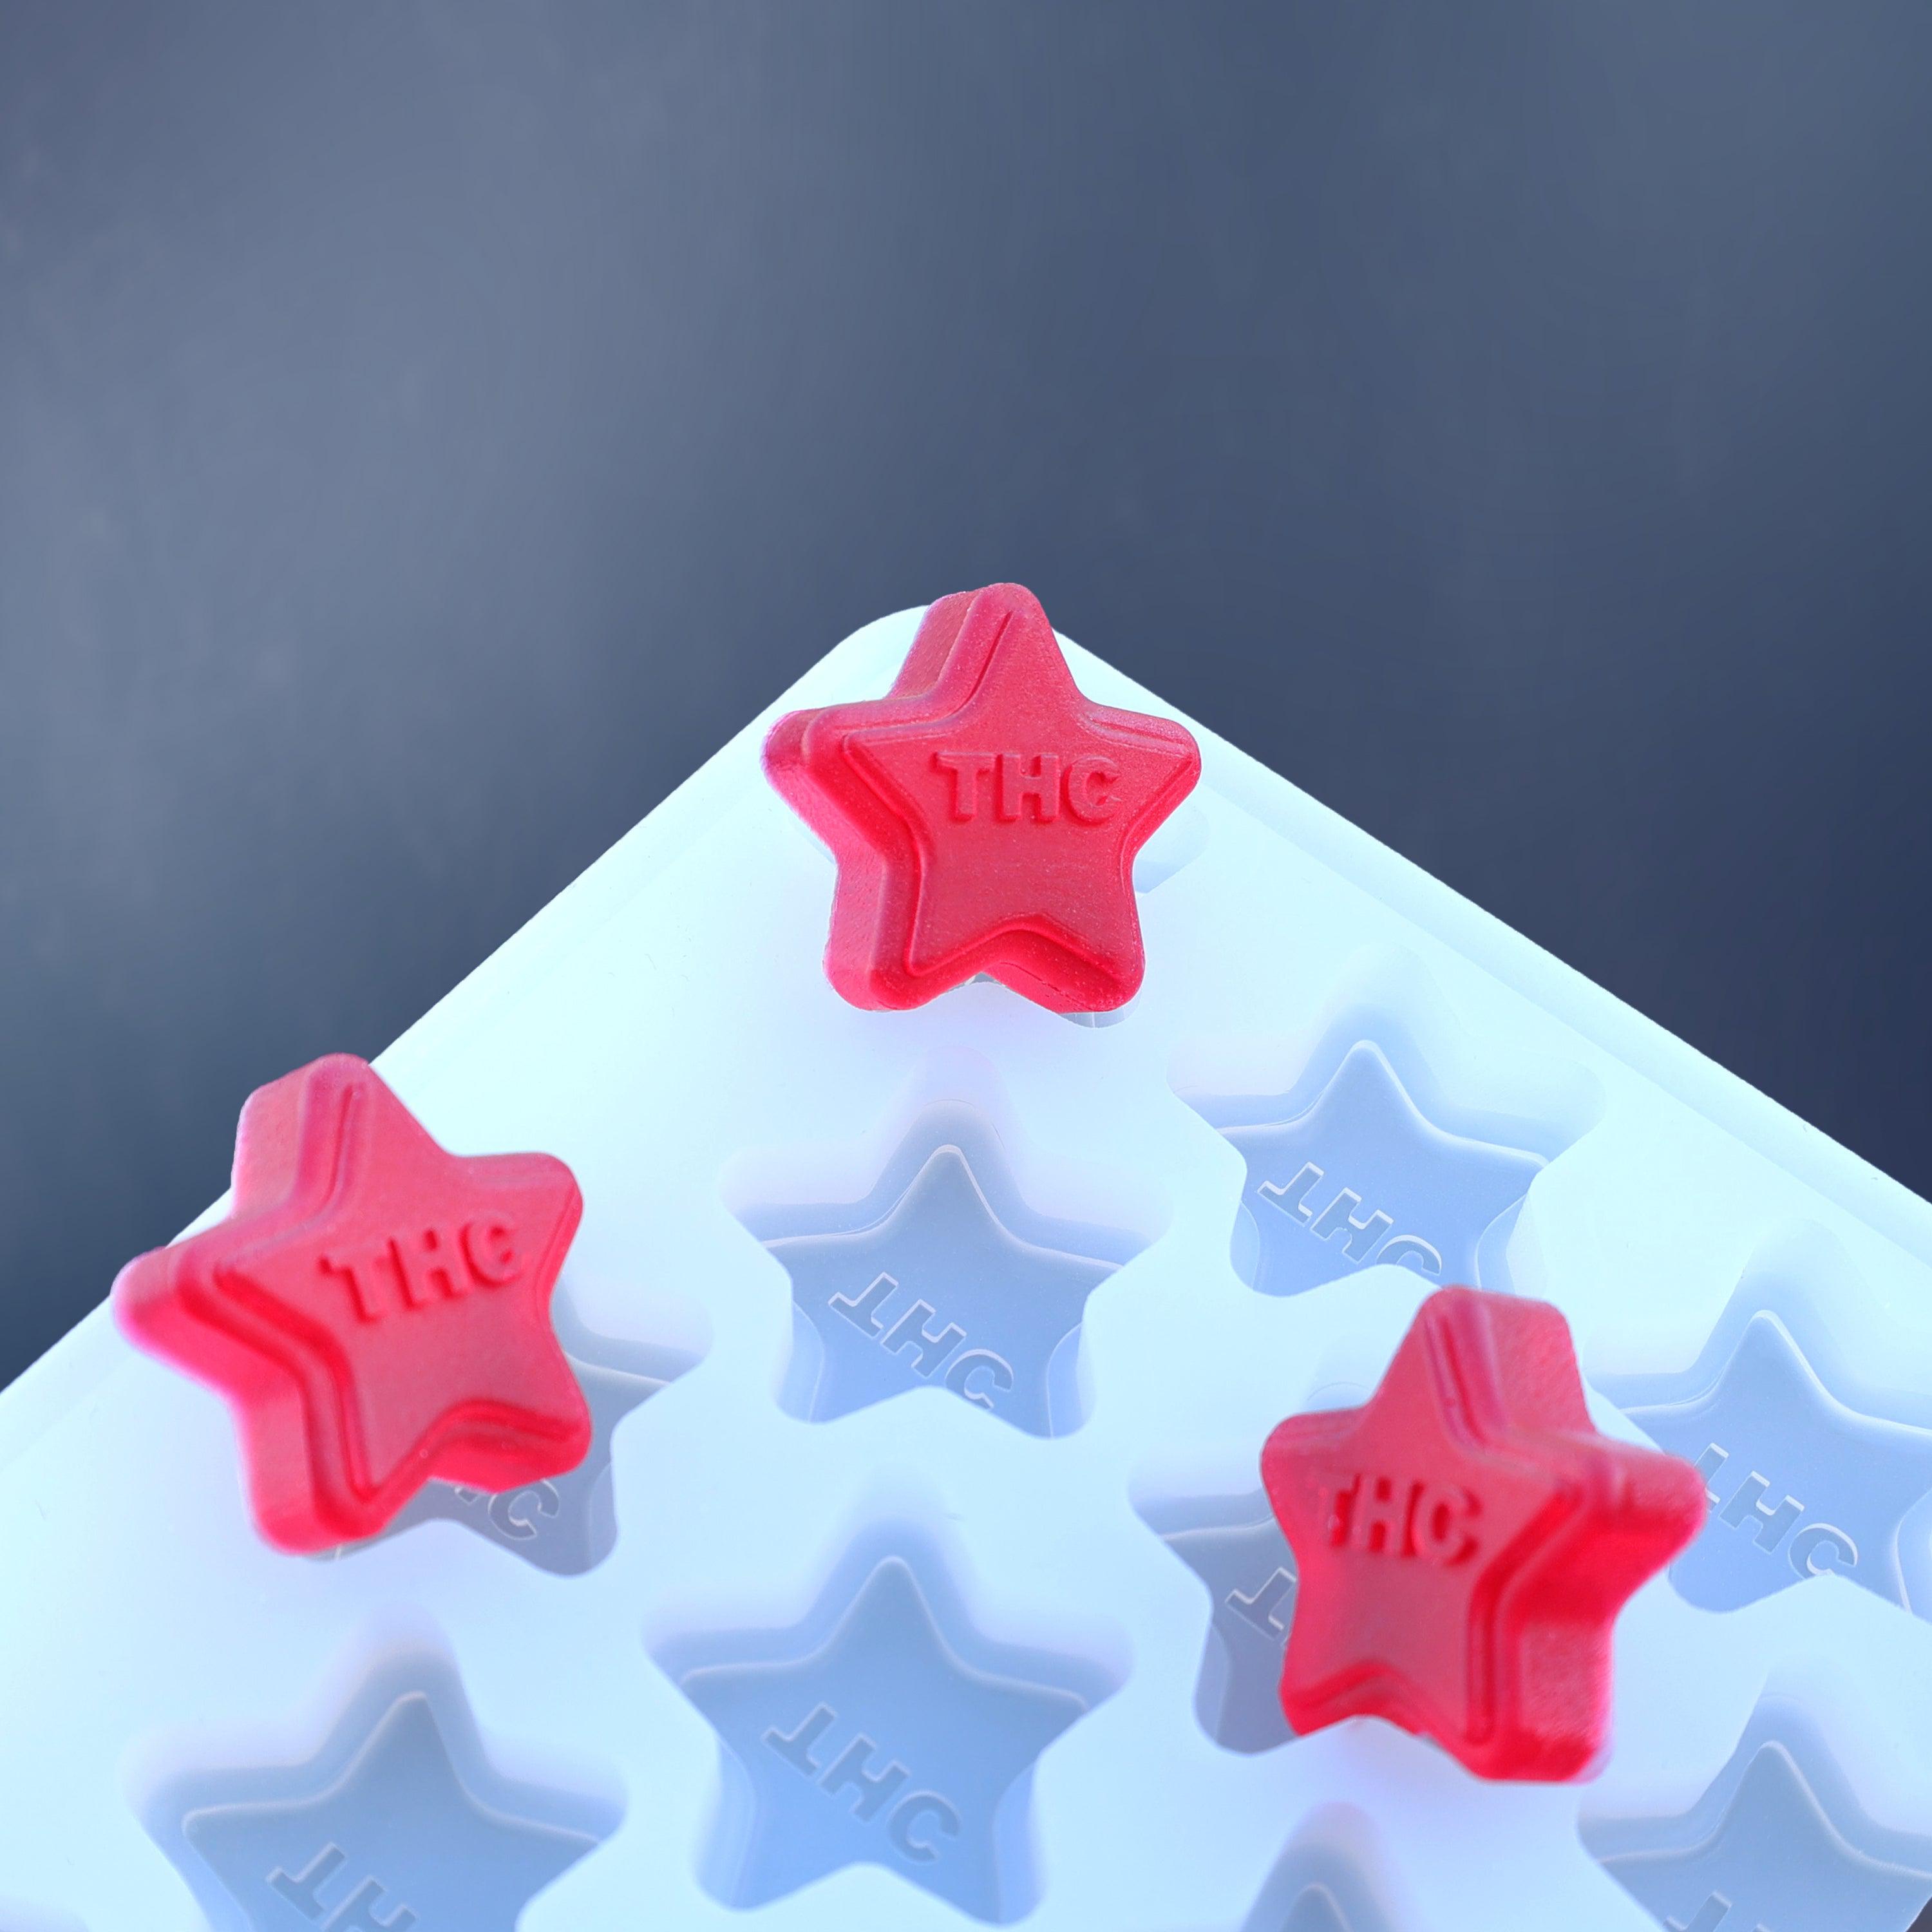 Scs Direct Star & Heart Silicone Gummy Candy Molds, 4 Pack